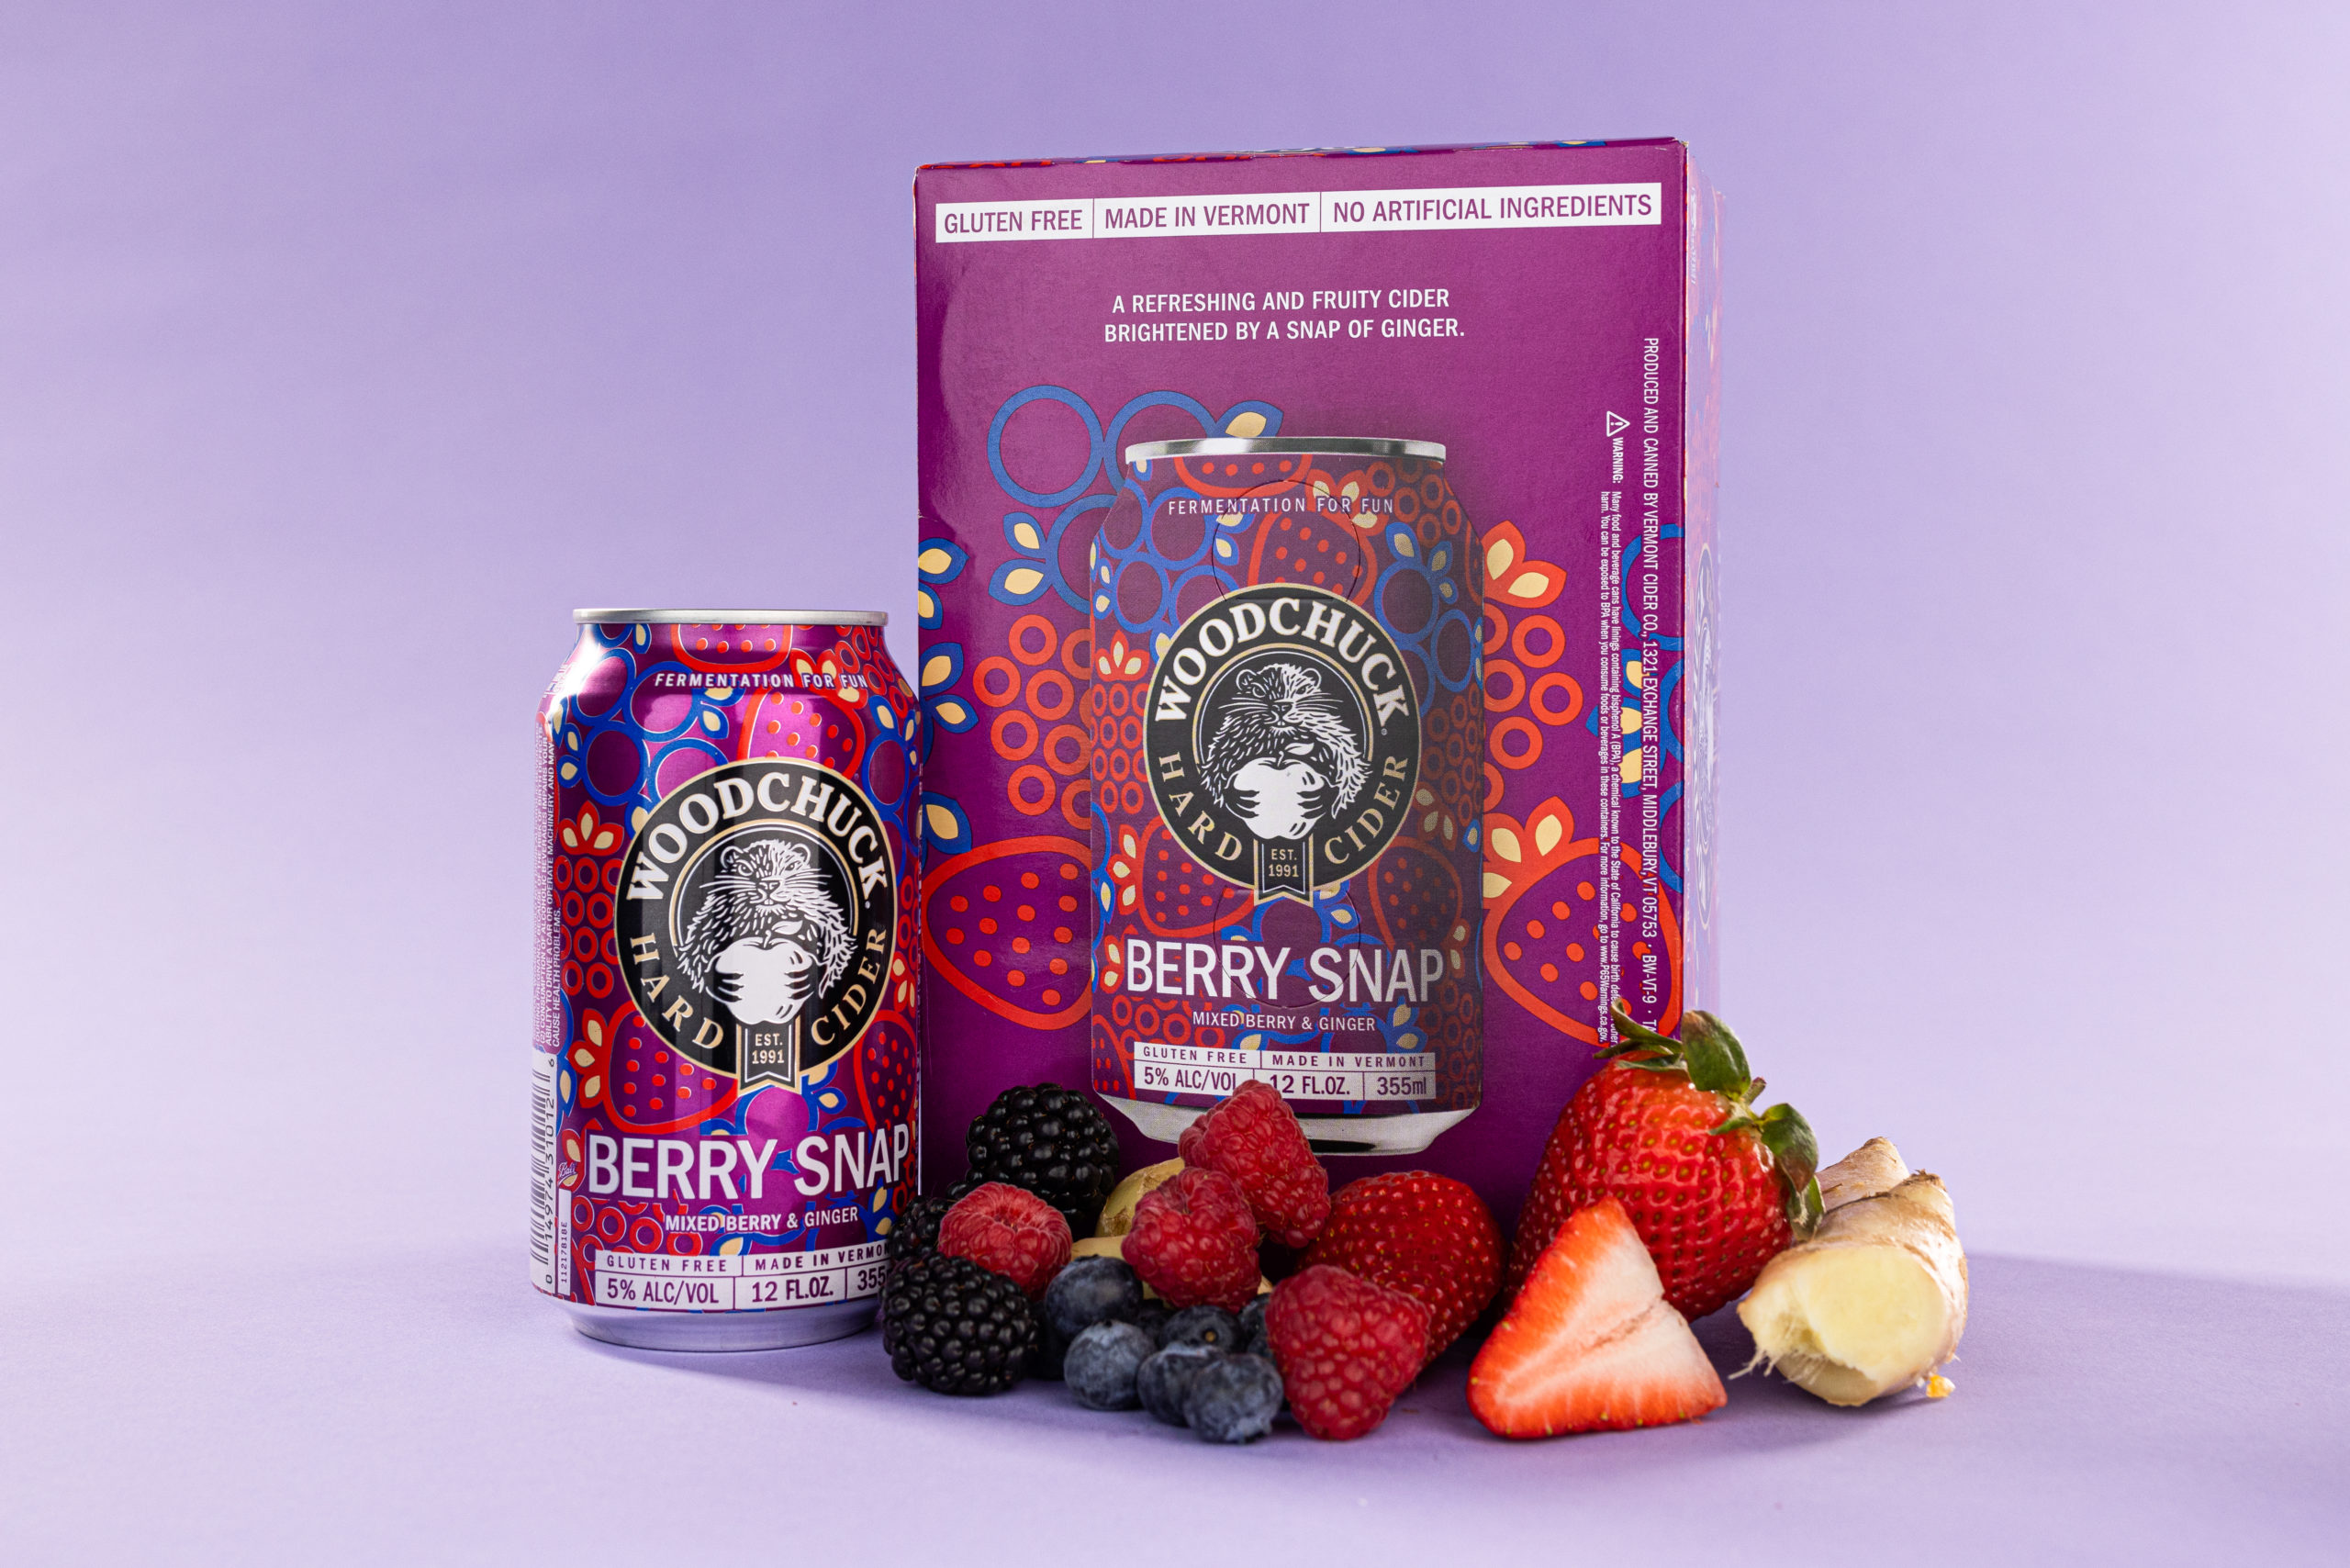 A 12 oz can and 6 pack of Woodchucks Berry Snap Hard Cider - Mixed Berry and Ginger- Surrounded by blackberries, raspberries, blueberries, strawberries, and ginger. The 6 pack reads " A refreshing and fruity cider brightened by a snap of ginger"